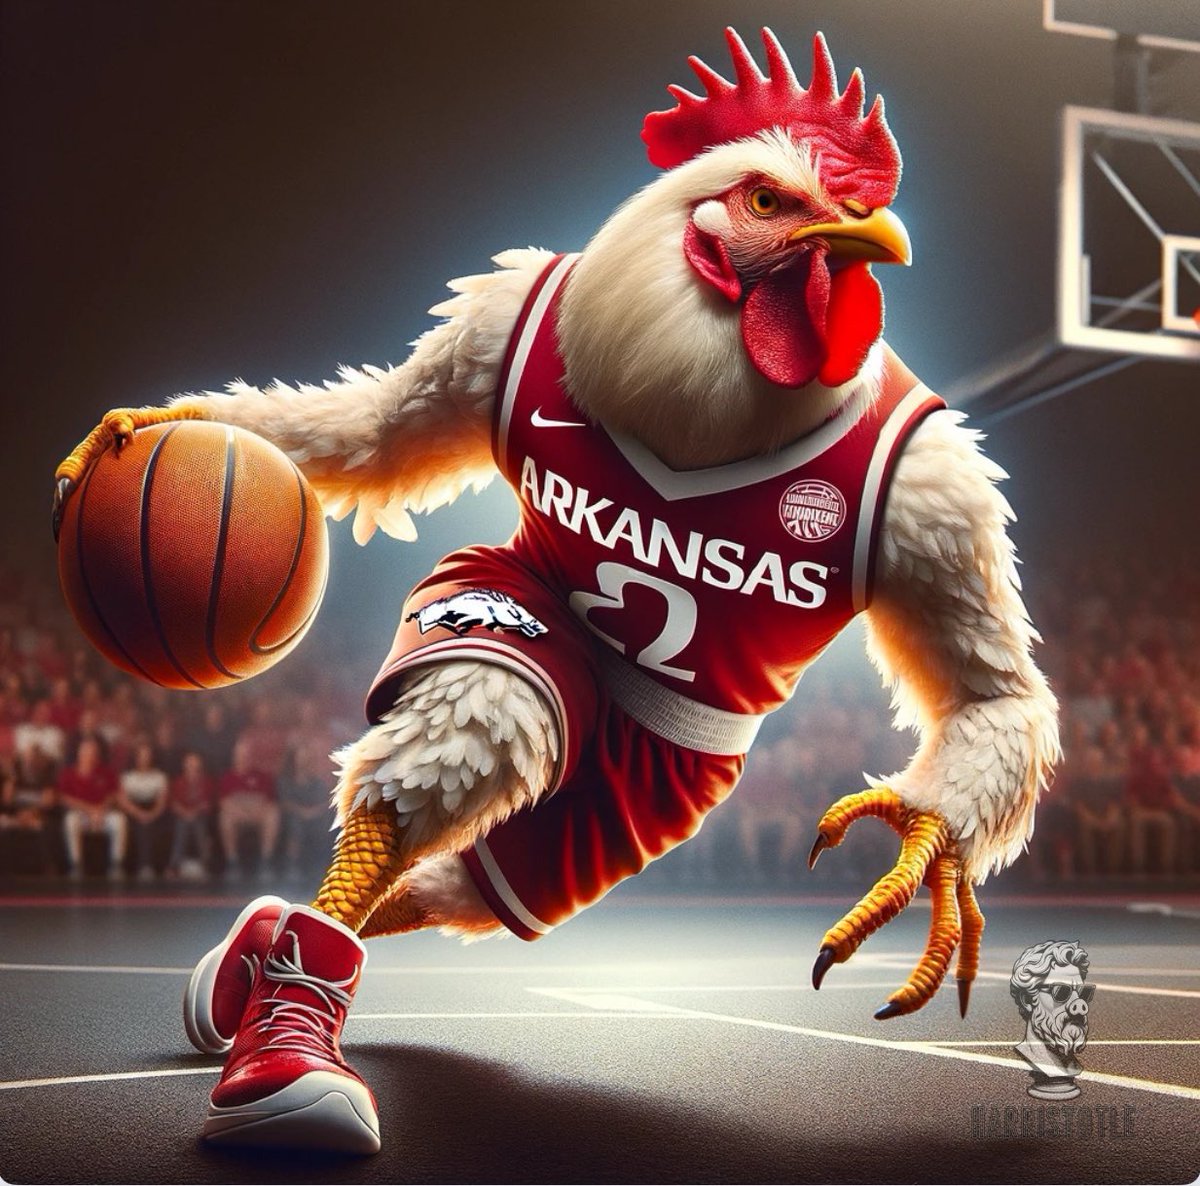 @Aaron_Torres Aaron, if “Chicken Man” is on the floor at Bud Walton Arena playing in front of 19,200 screaming Hog fans, the “Final Four” will be inevitable very soon! #WPS #GoHogs #CalArk #Razorbacks